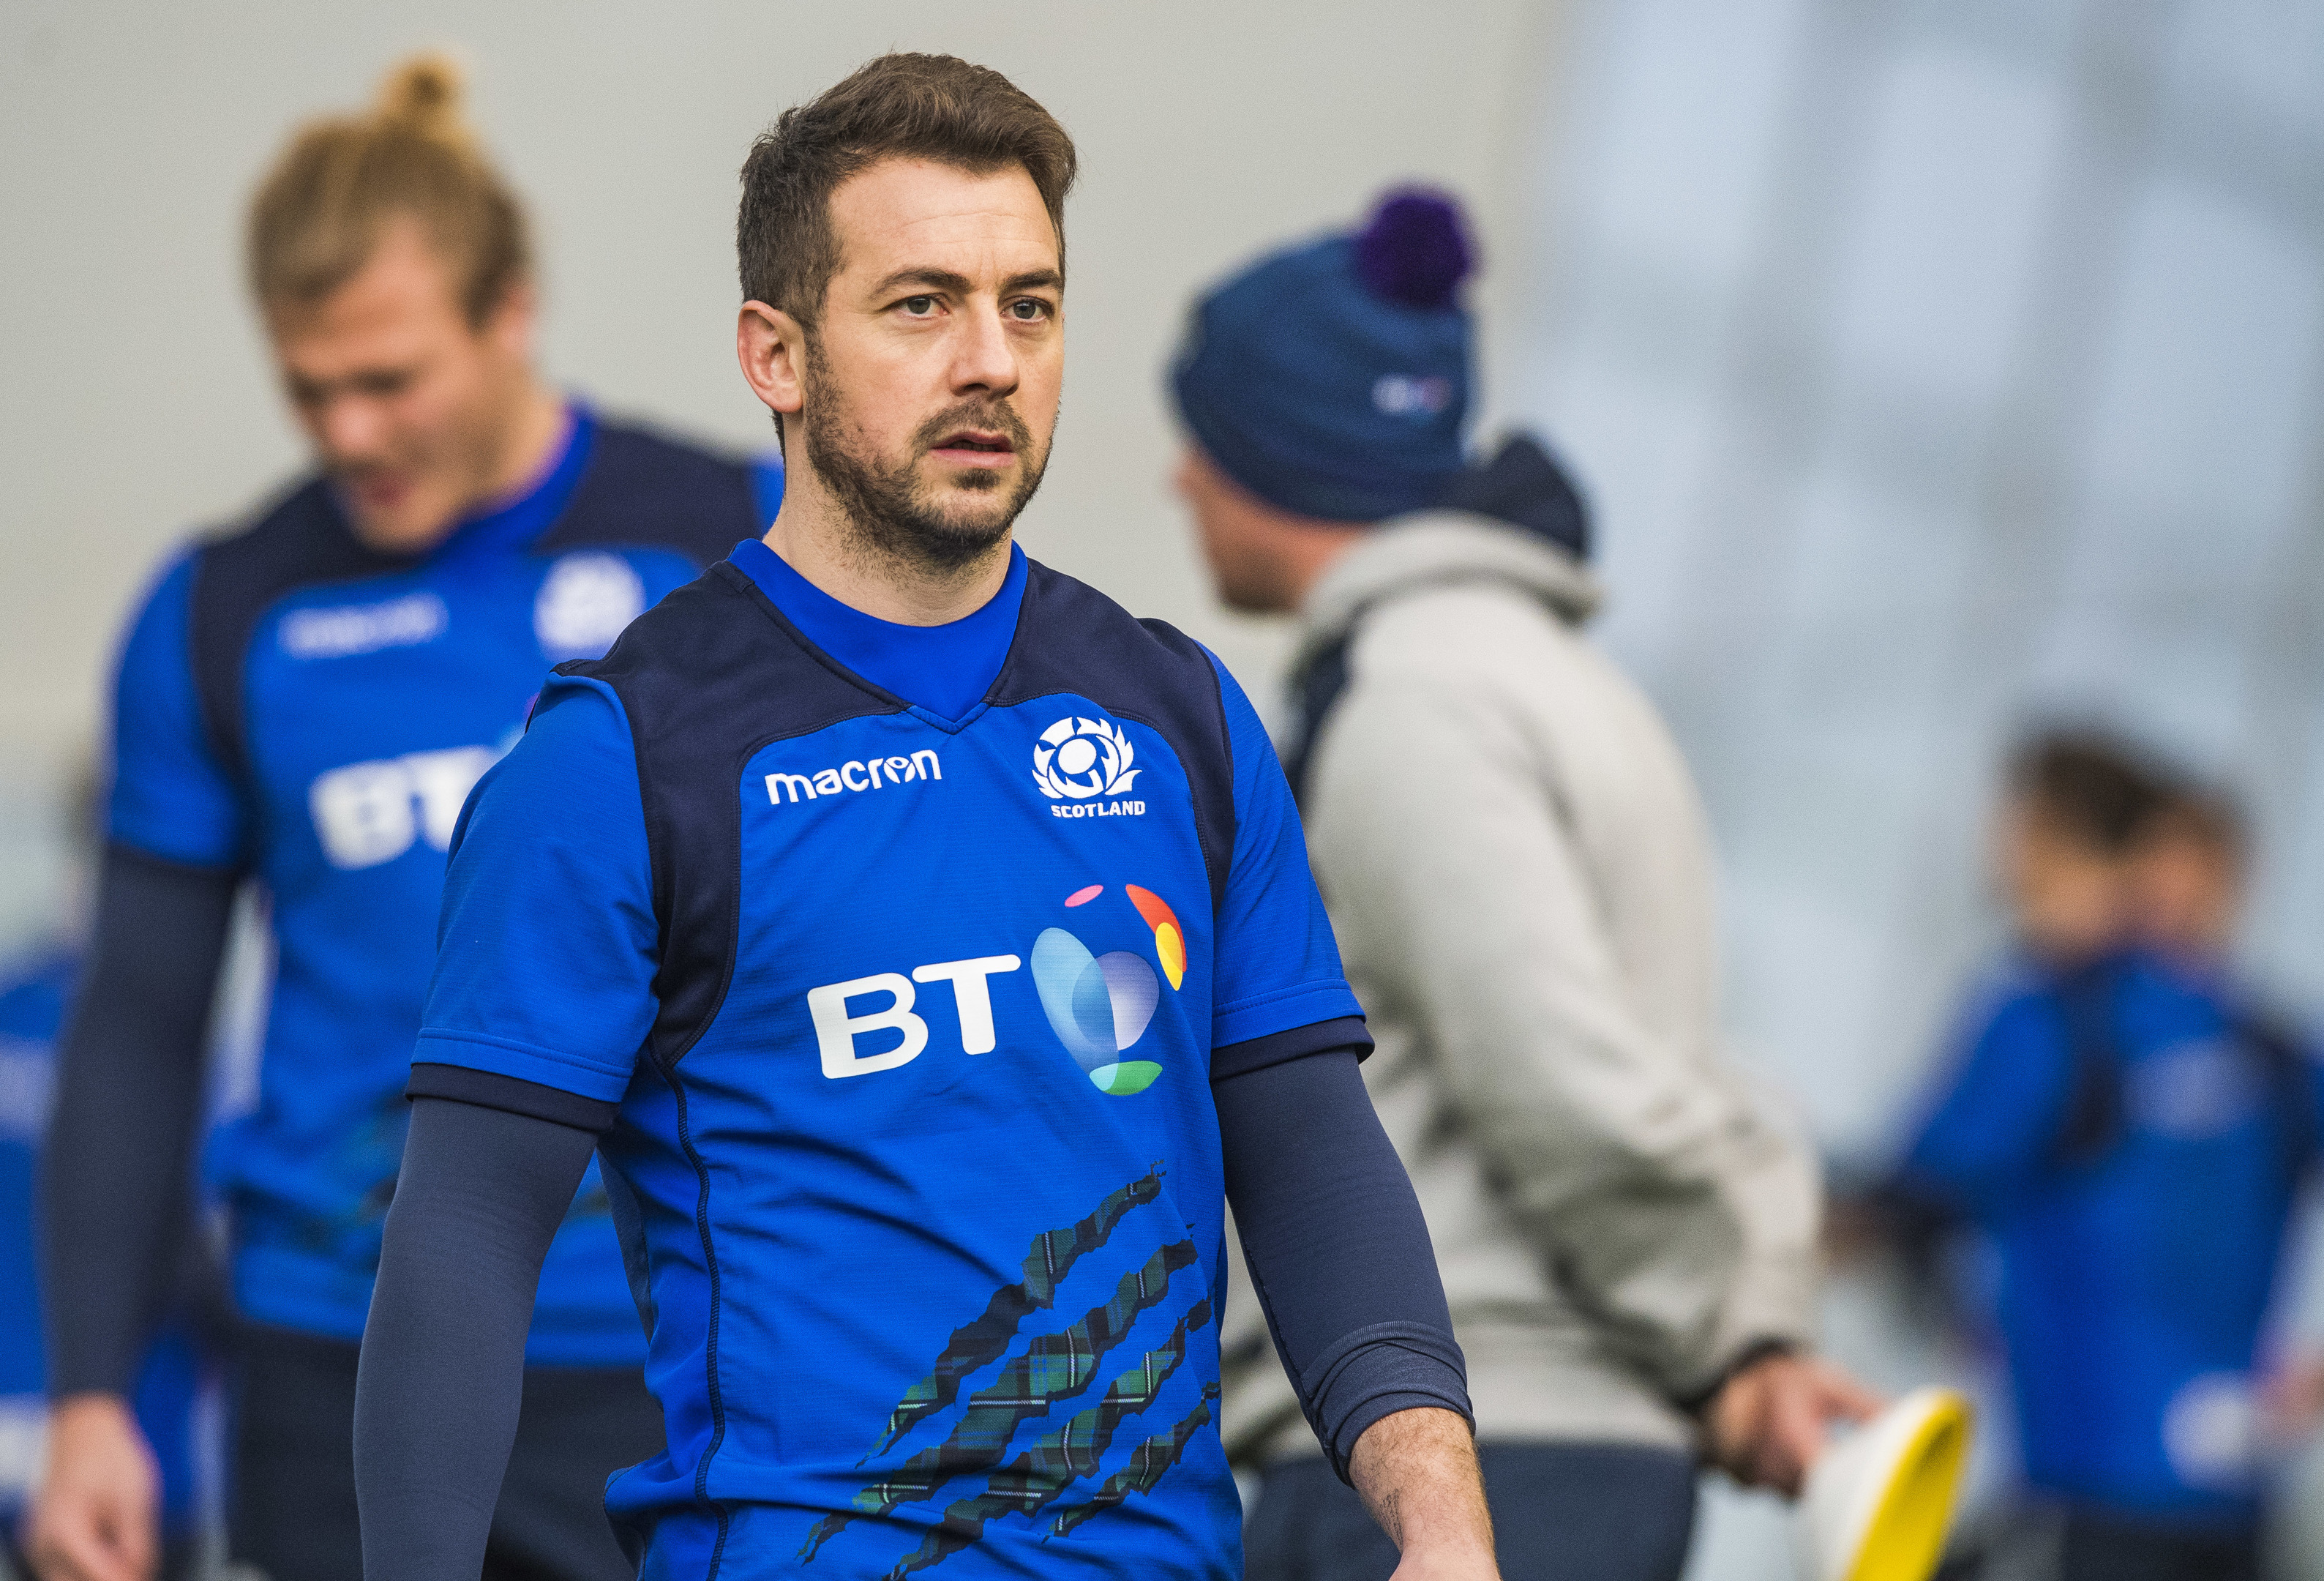 Greig Laidlaw was at Scotland training at Oriam less than 24 hours after playing for Clermont-Auvergne.